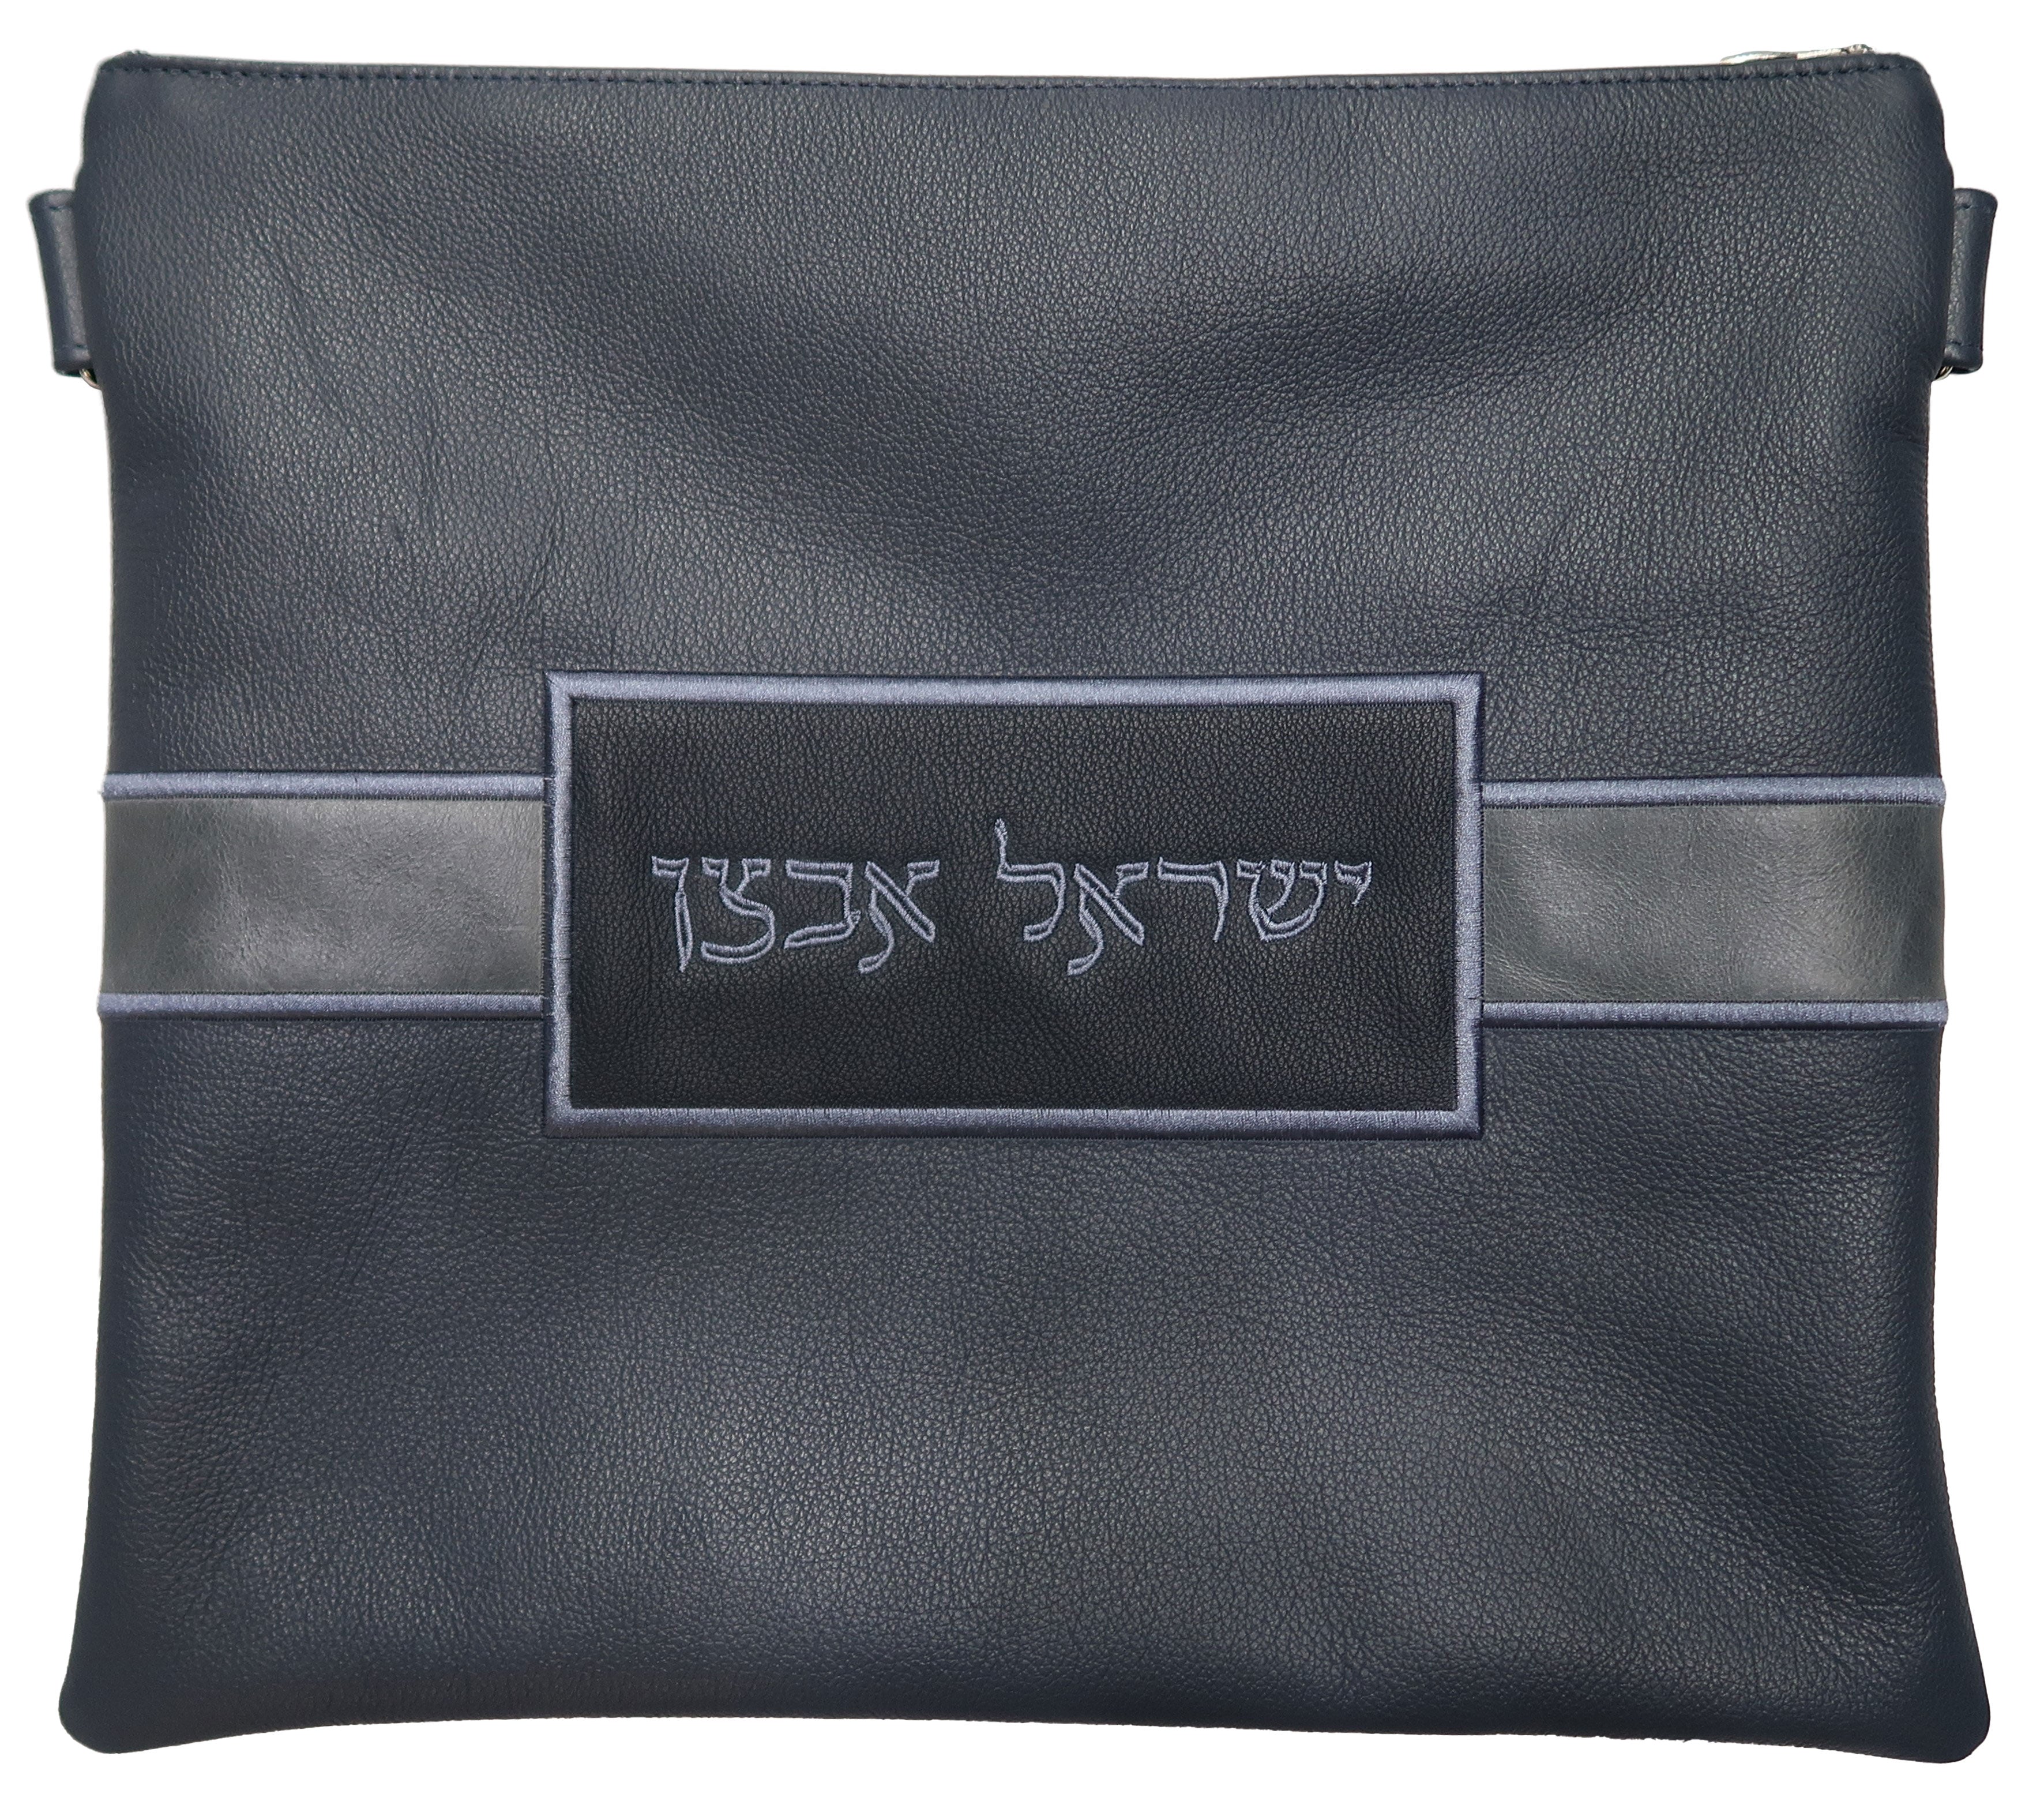 Tallis and/or Tefillin bag with name label and side strips